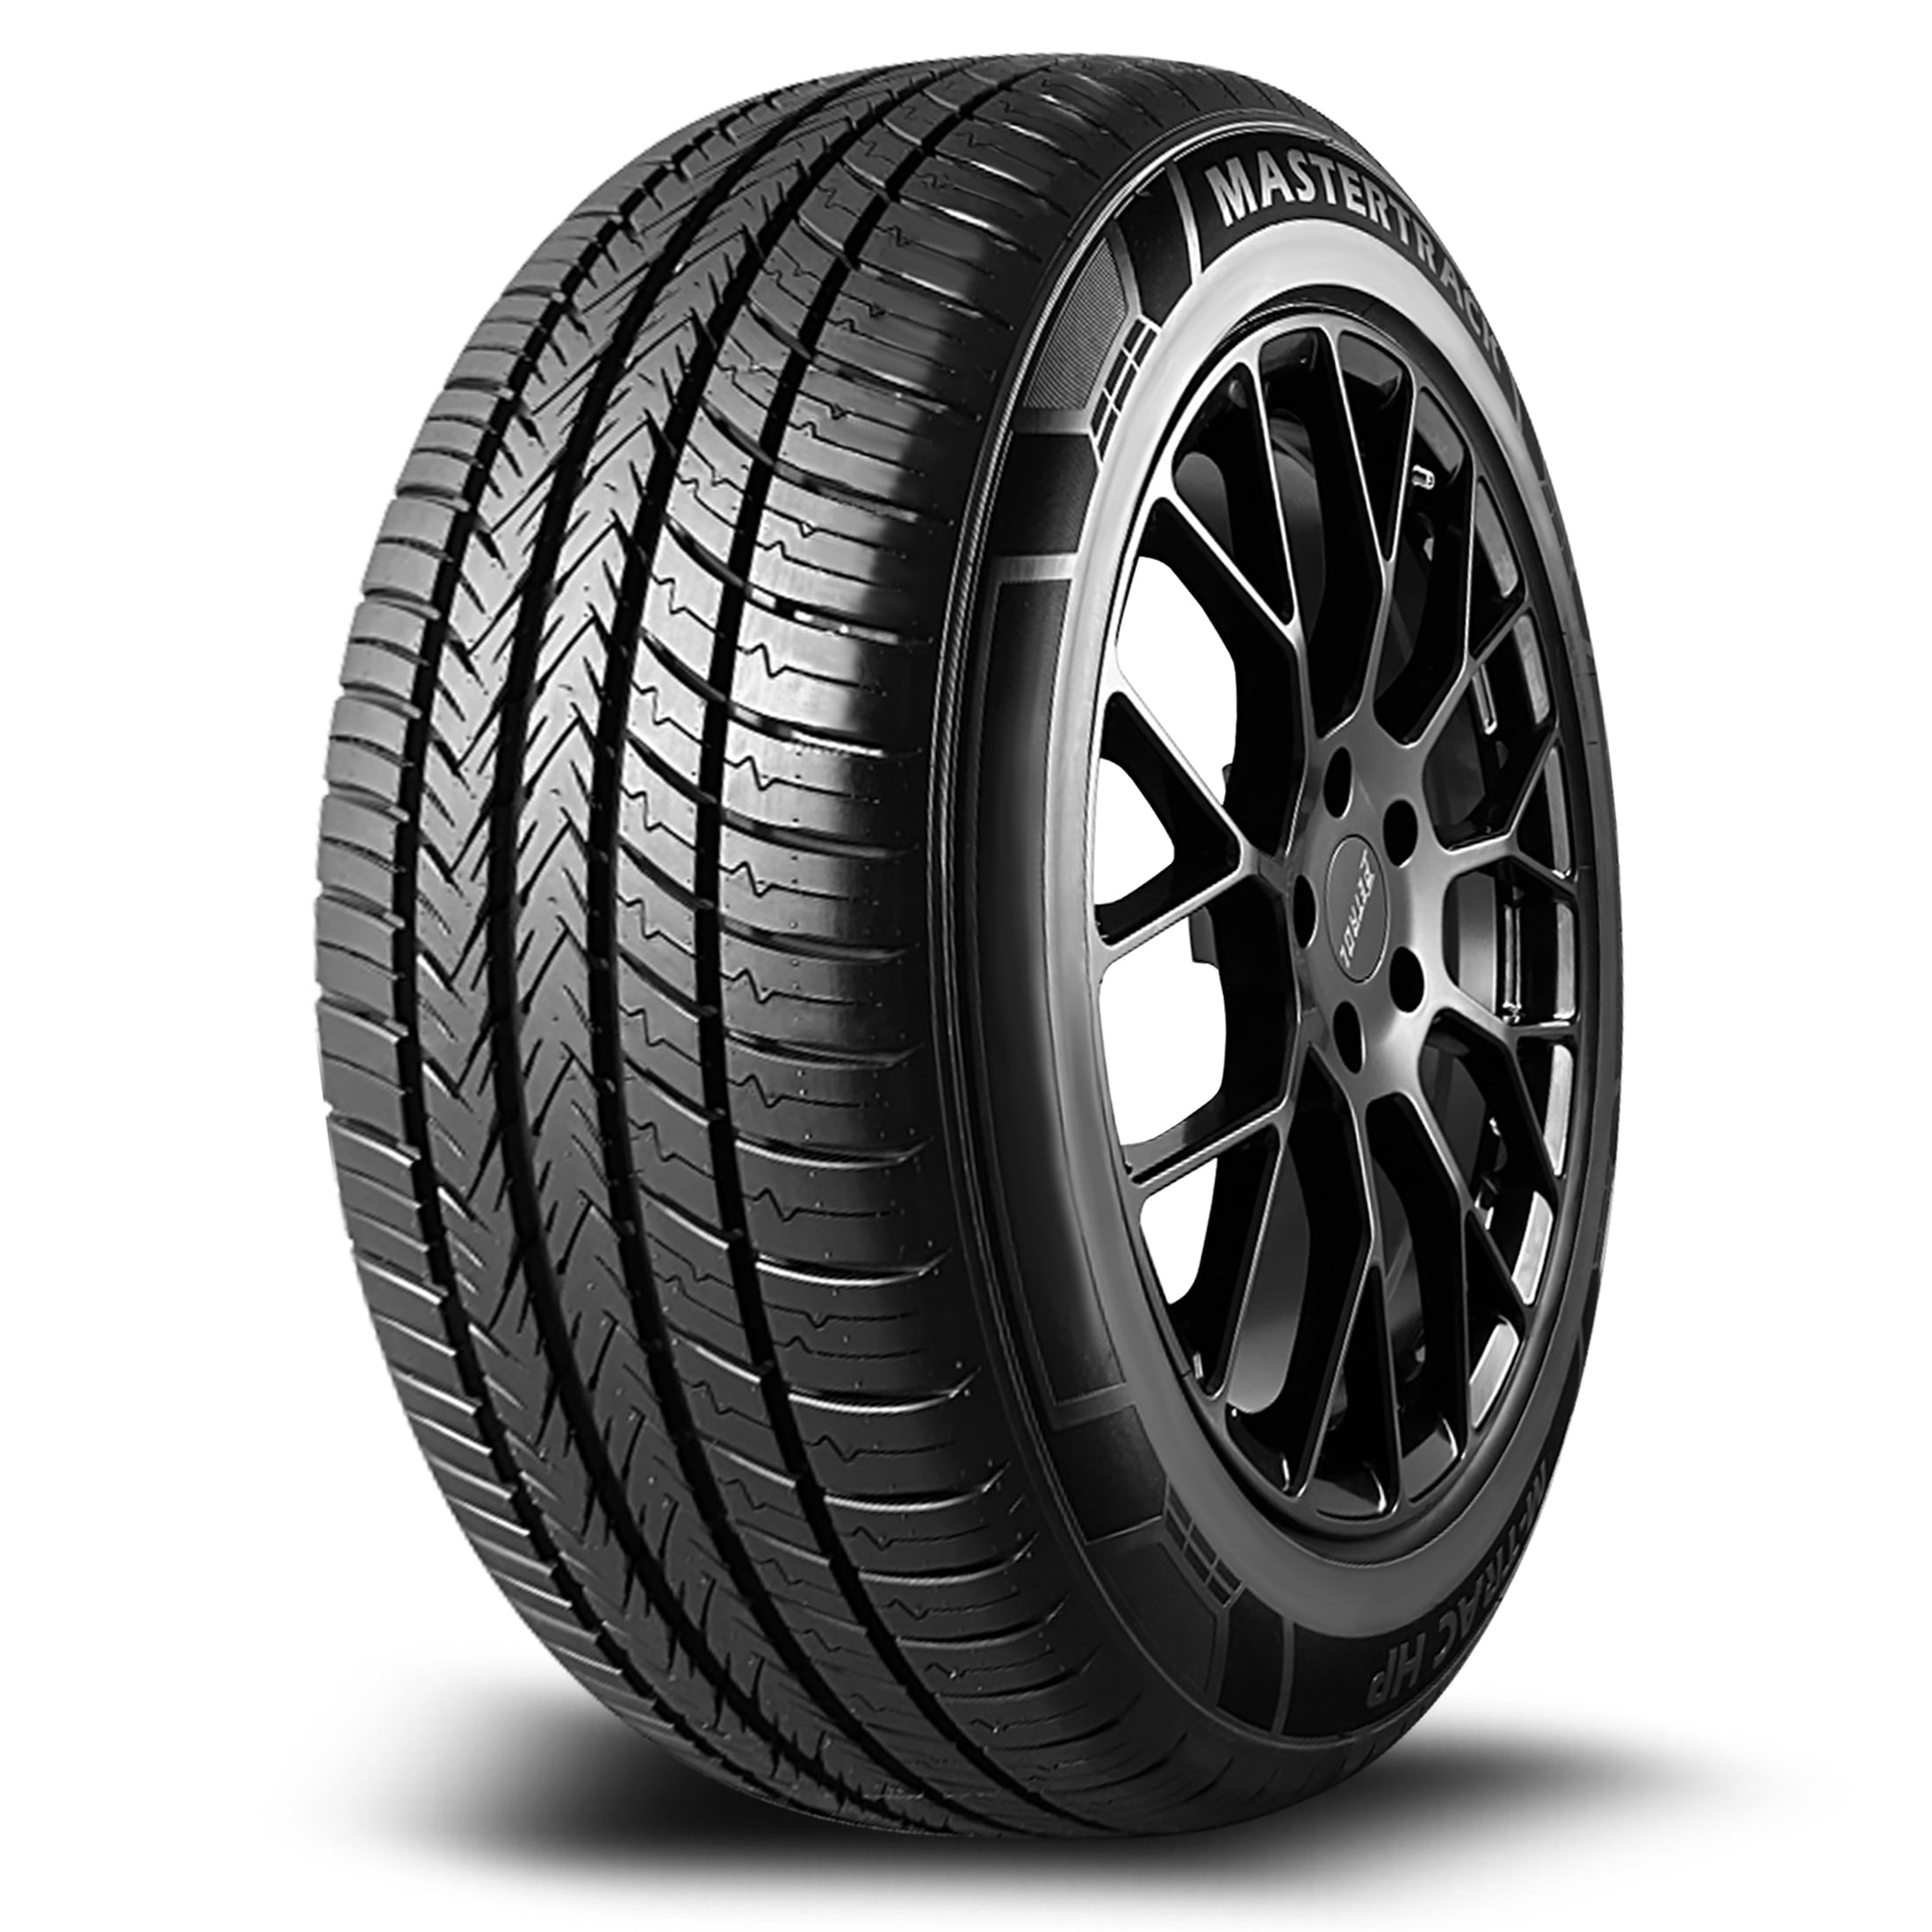 Only) 235/50ZR18 235/50/18 Season Performance (Tire High HP Tire All Mastertrack 97W M-TRAC Passenger